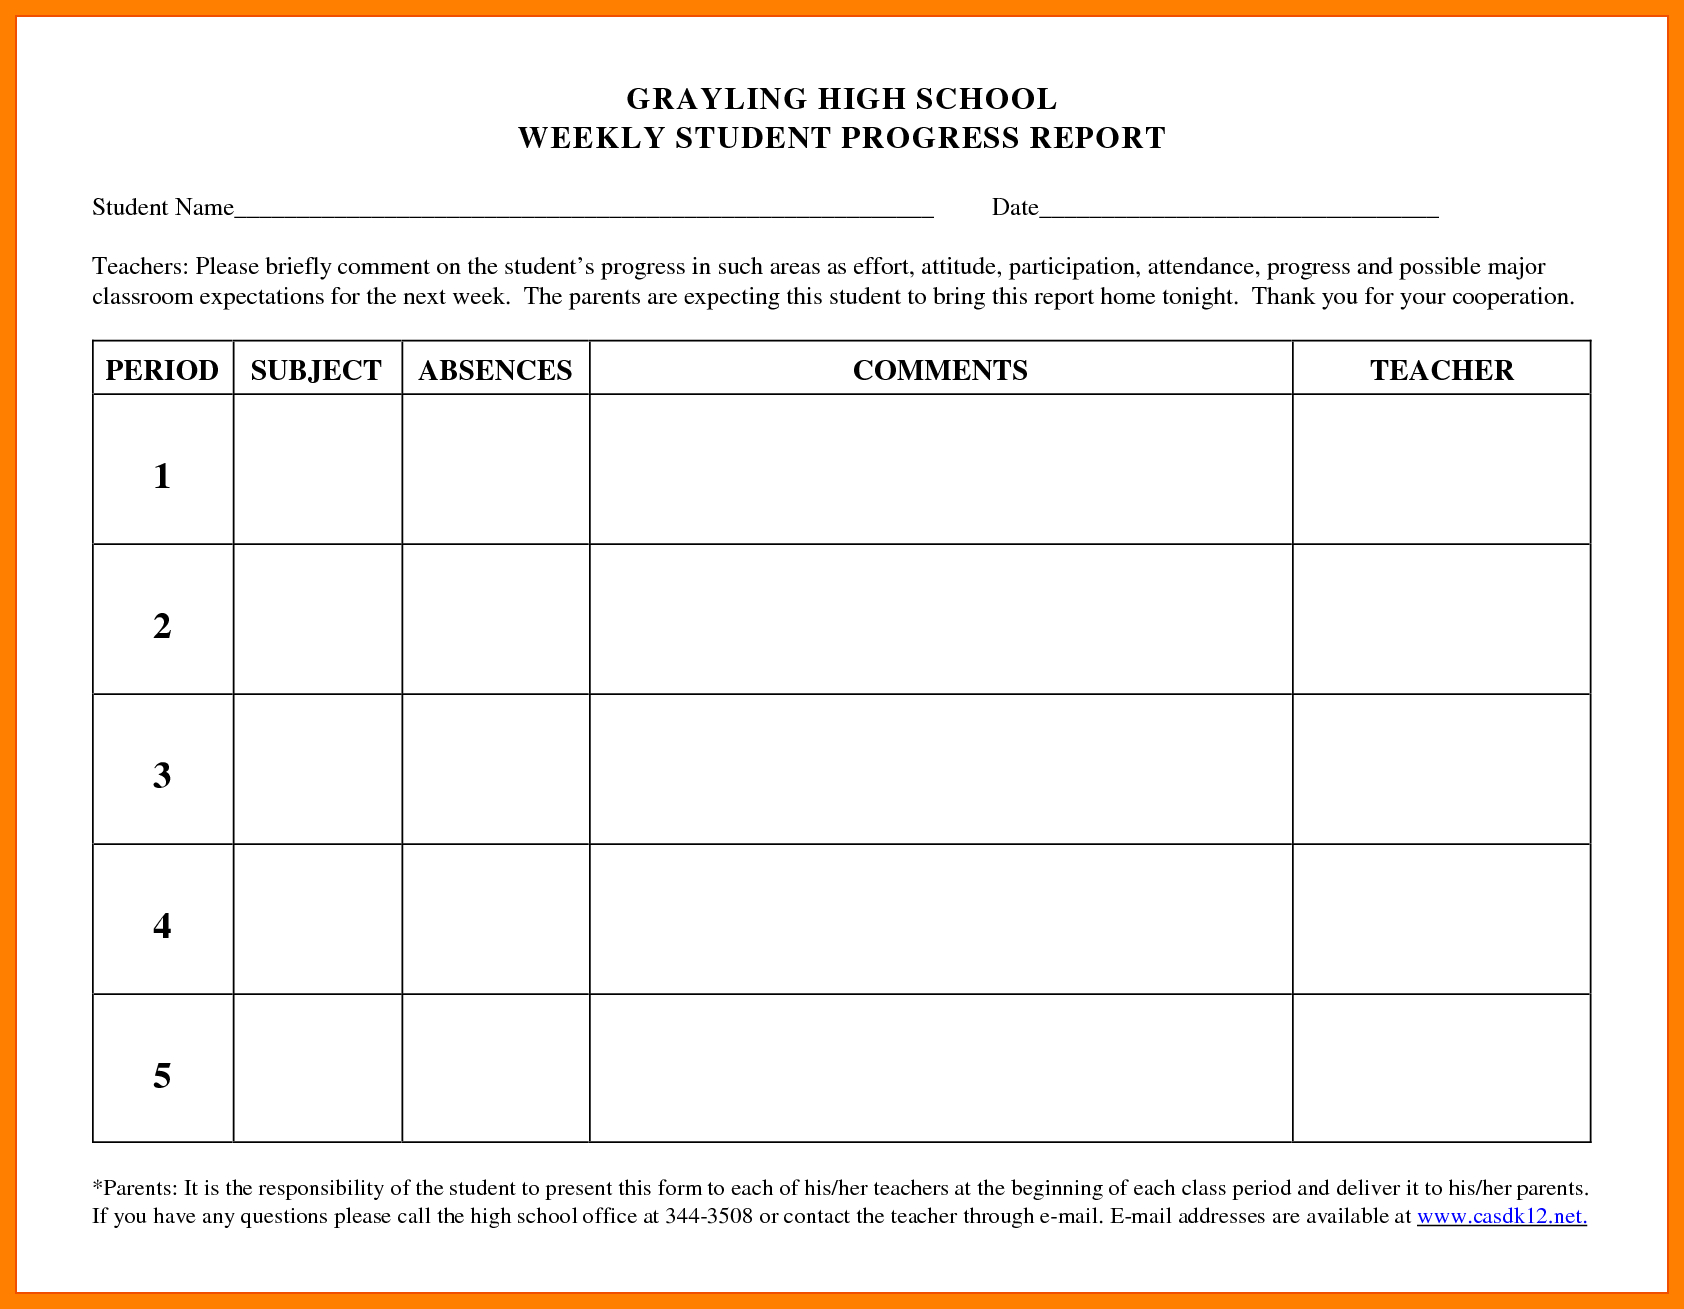 Report Examples Best Photos Of Monthly Student Progress Intended For High School Progress Report Template